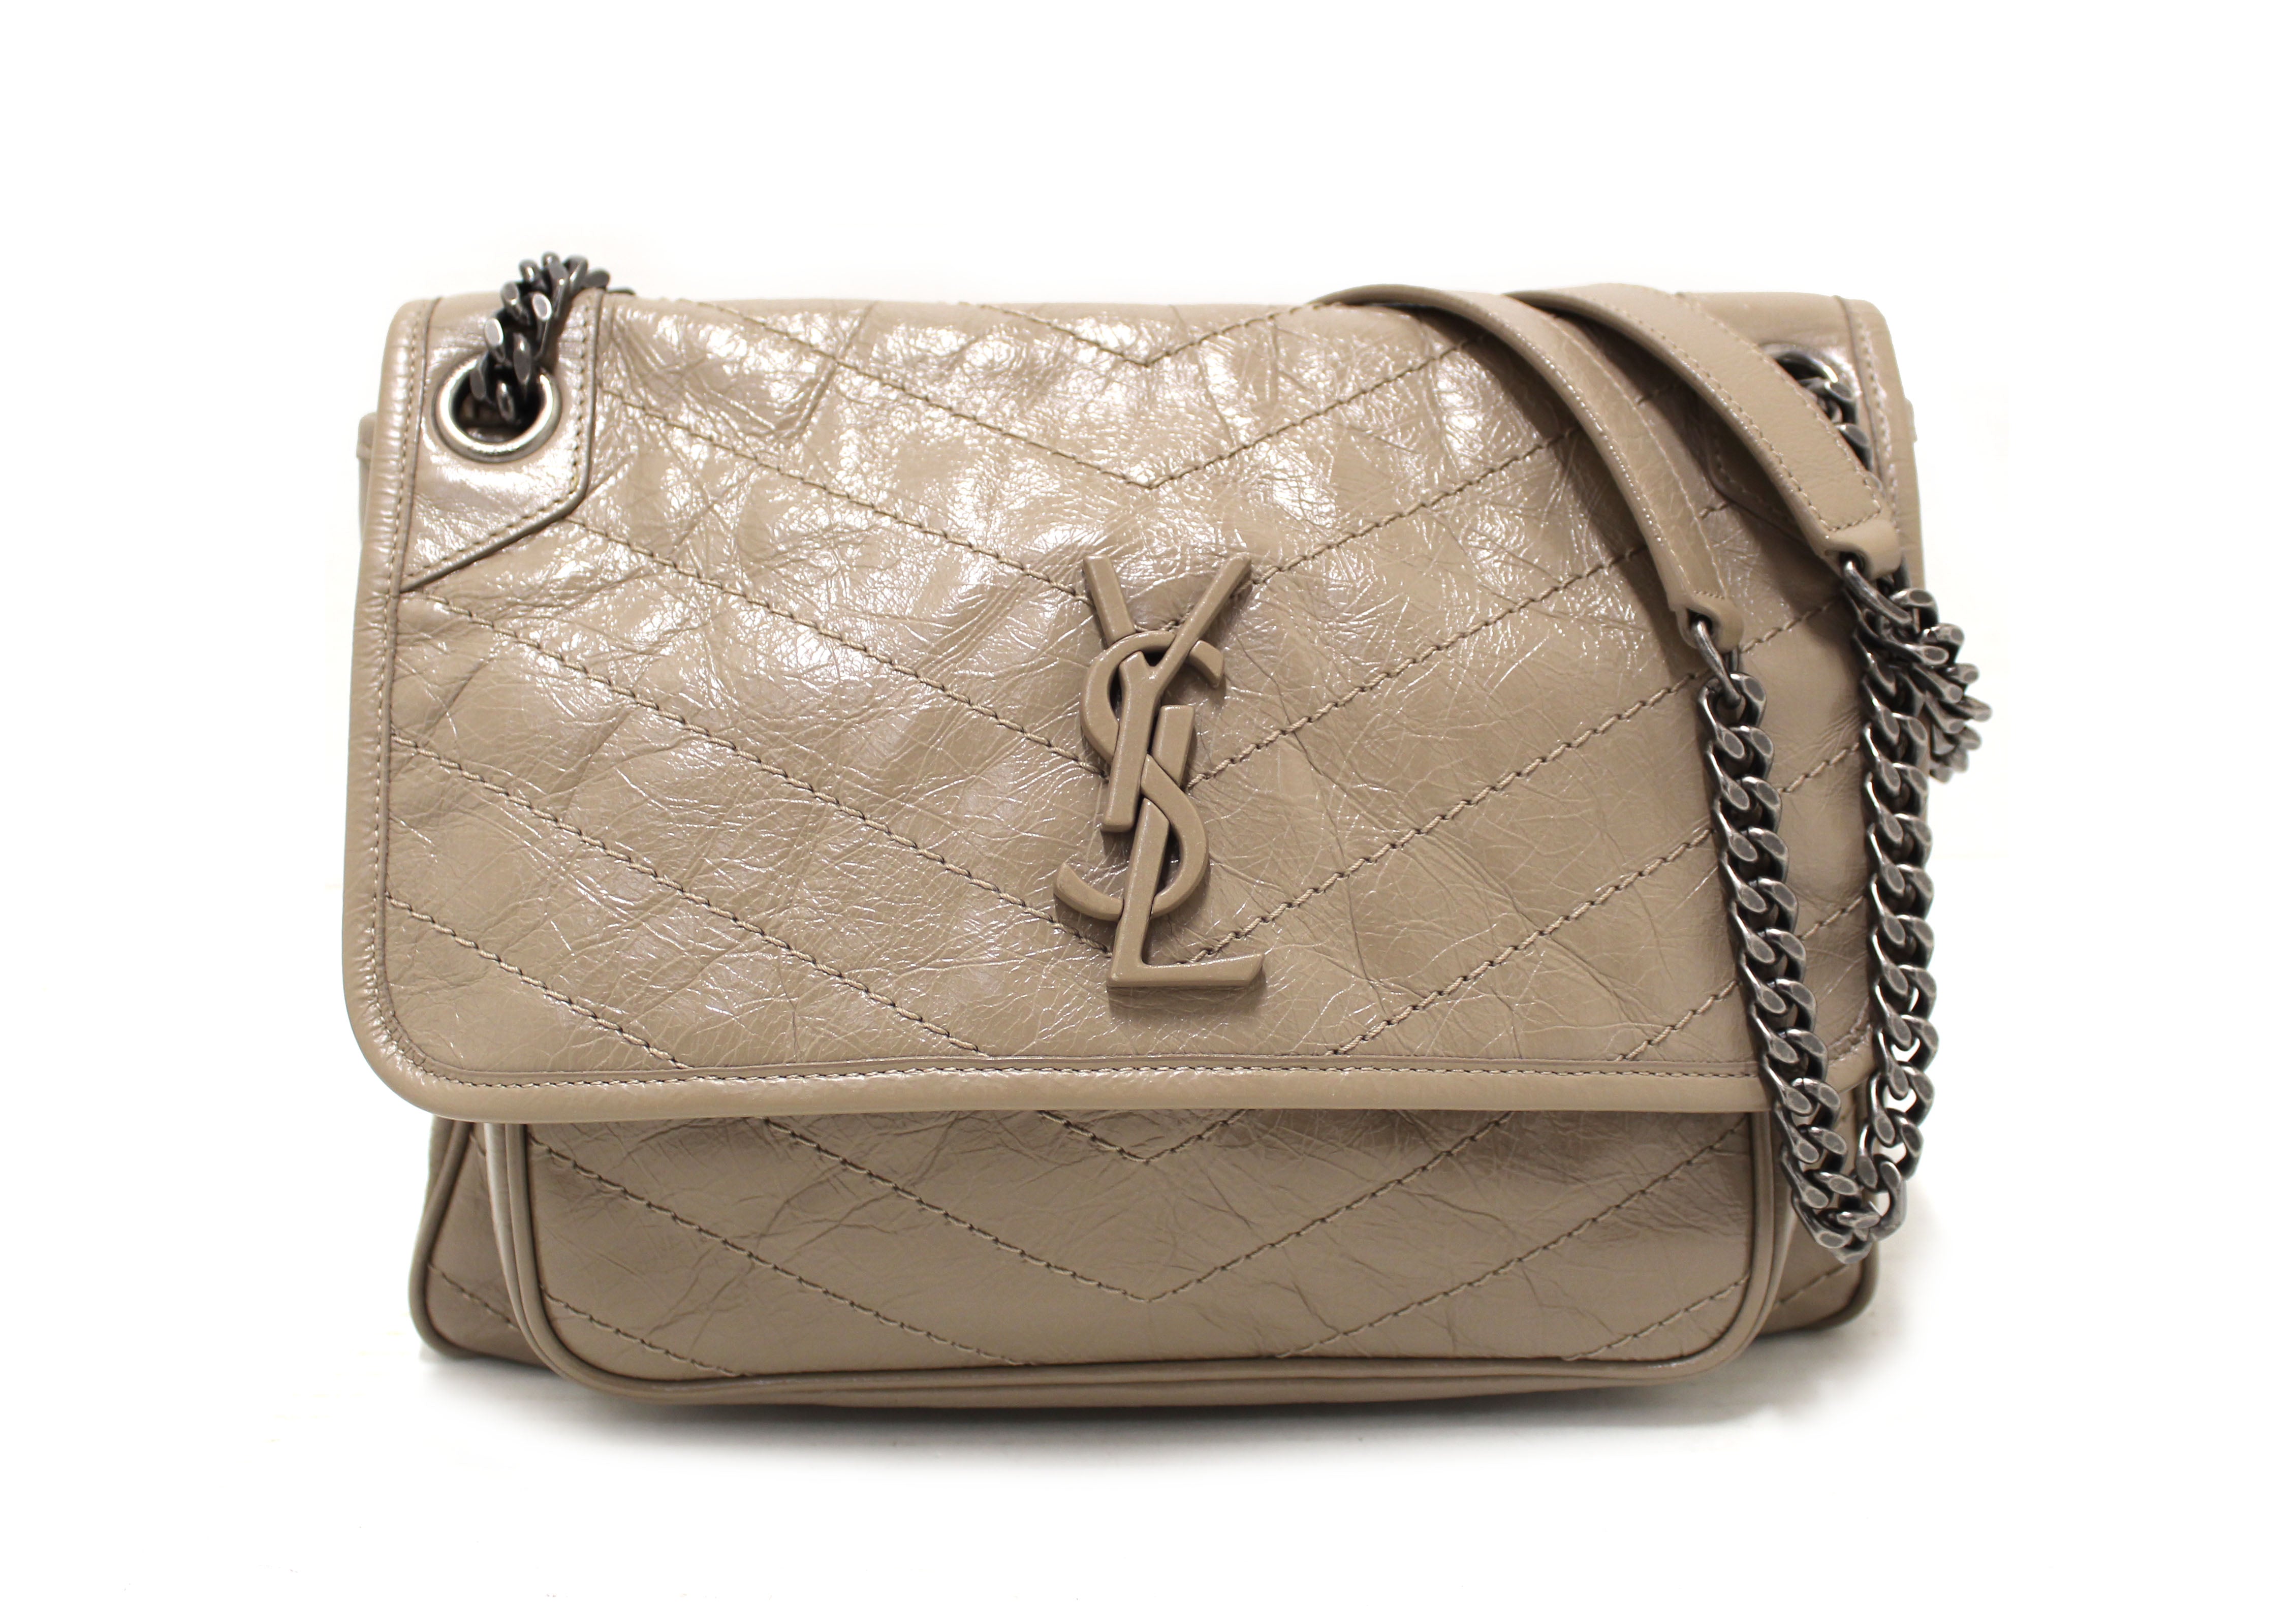 Auth Yves Saint Laurent Clutch Second Bag Pink Logo Gold YSL Leather Used